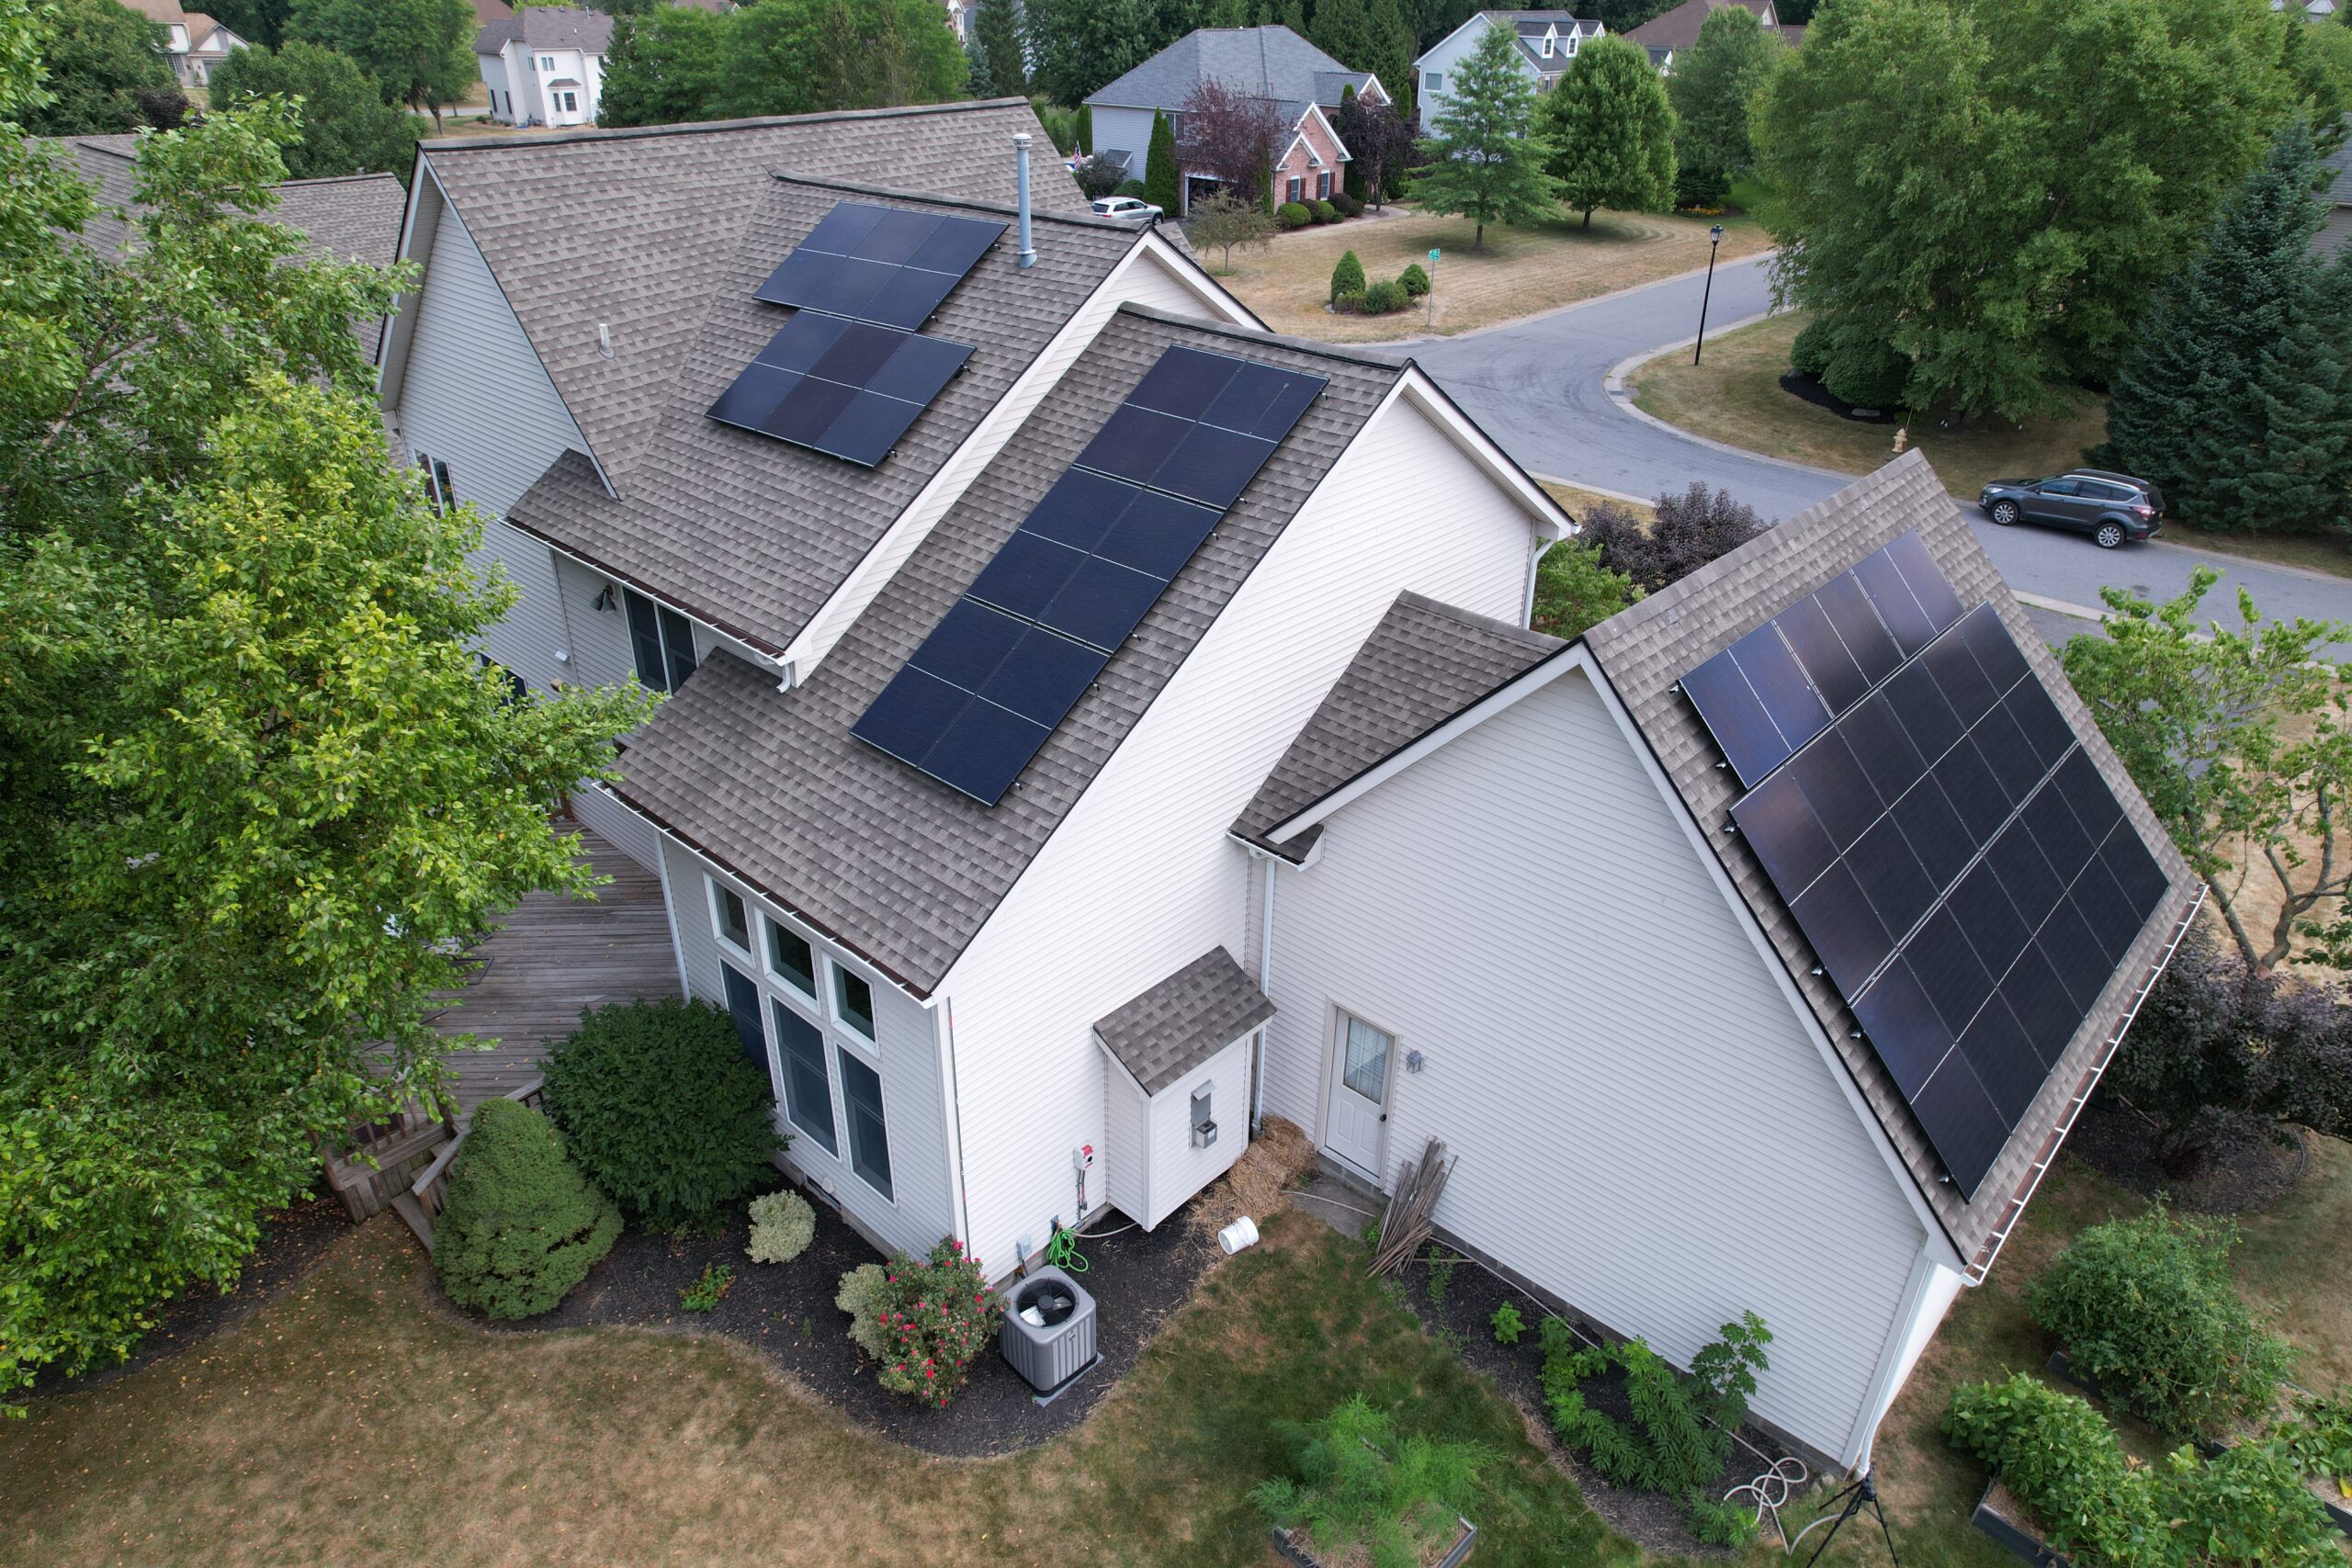 Demystifying Net Metering: What New York Solar Customers Need to Know